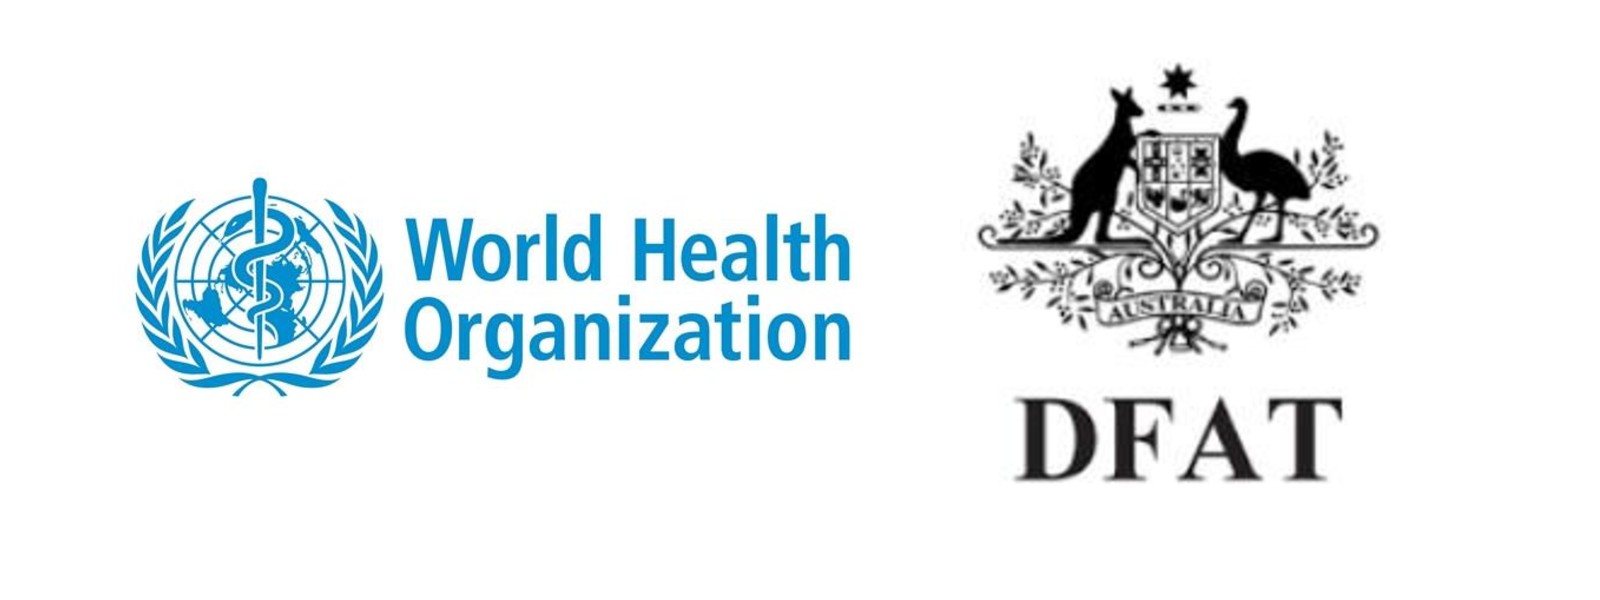 Essential items donated by the WHO and DFAT Australia